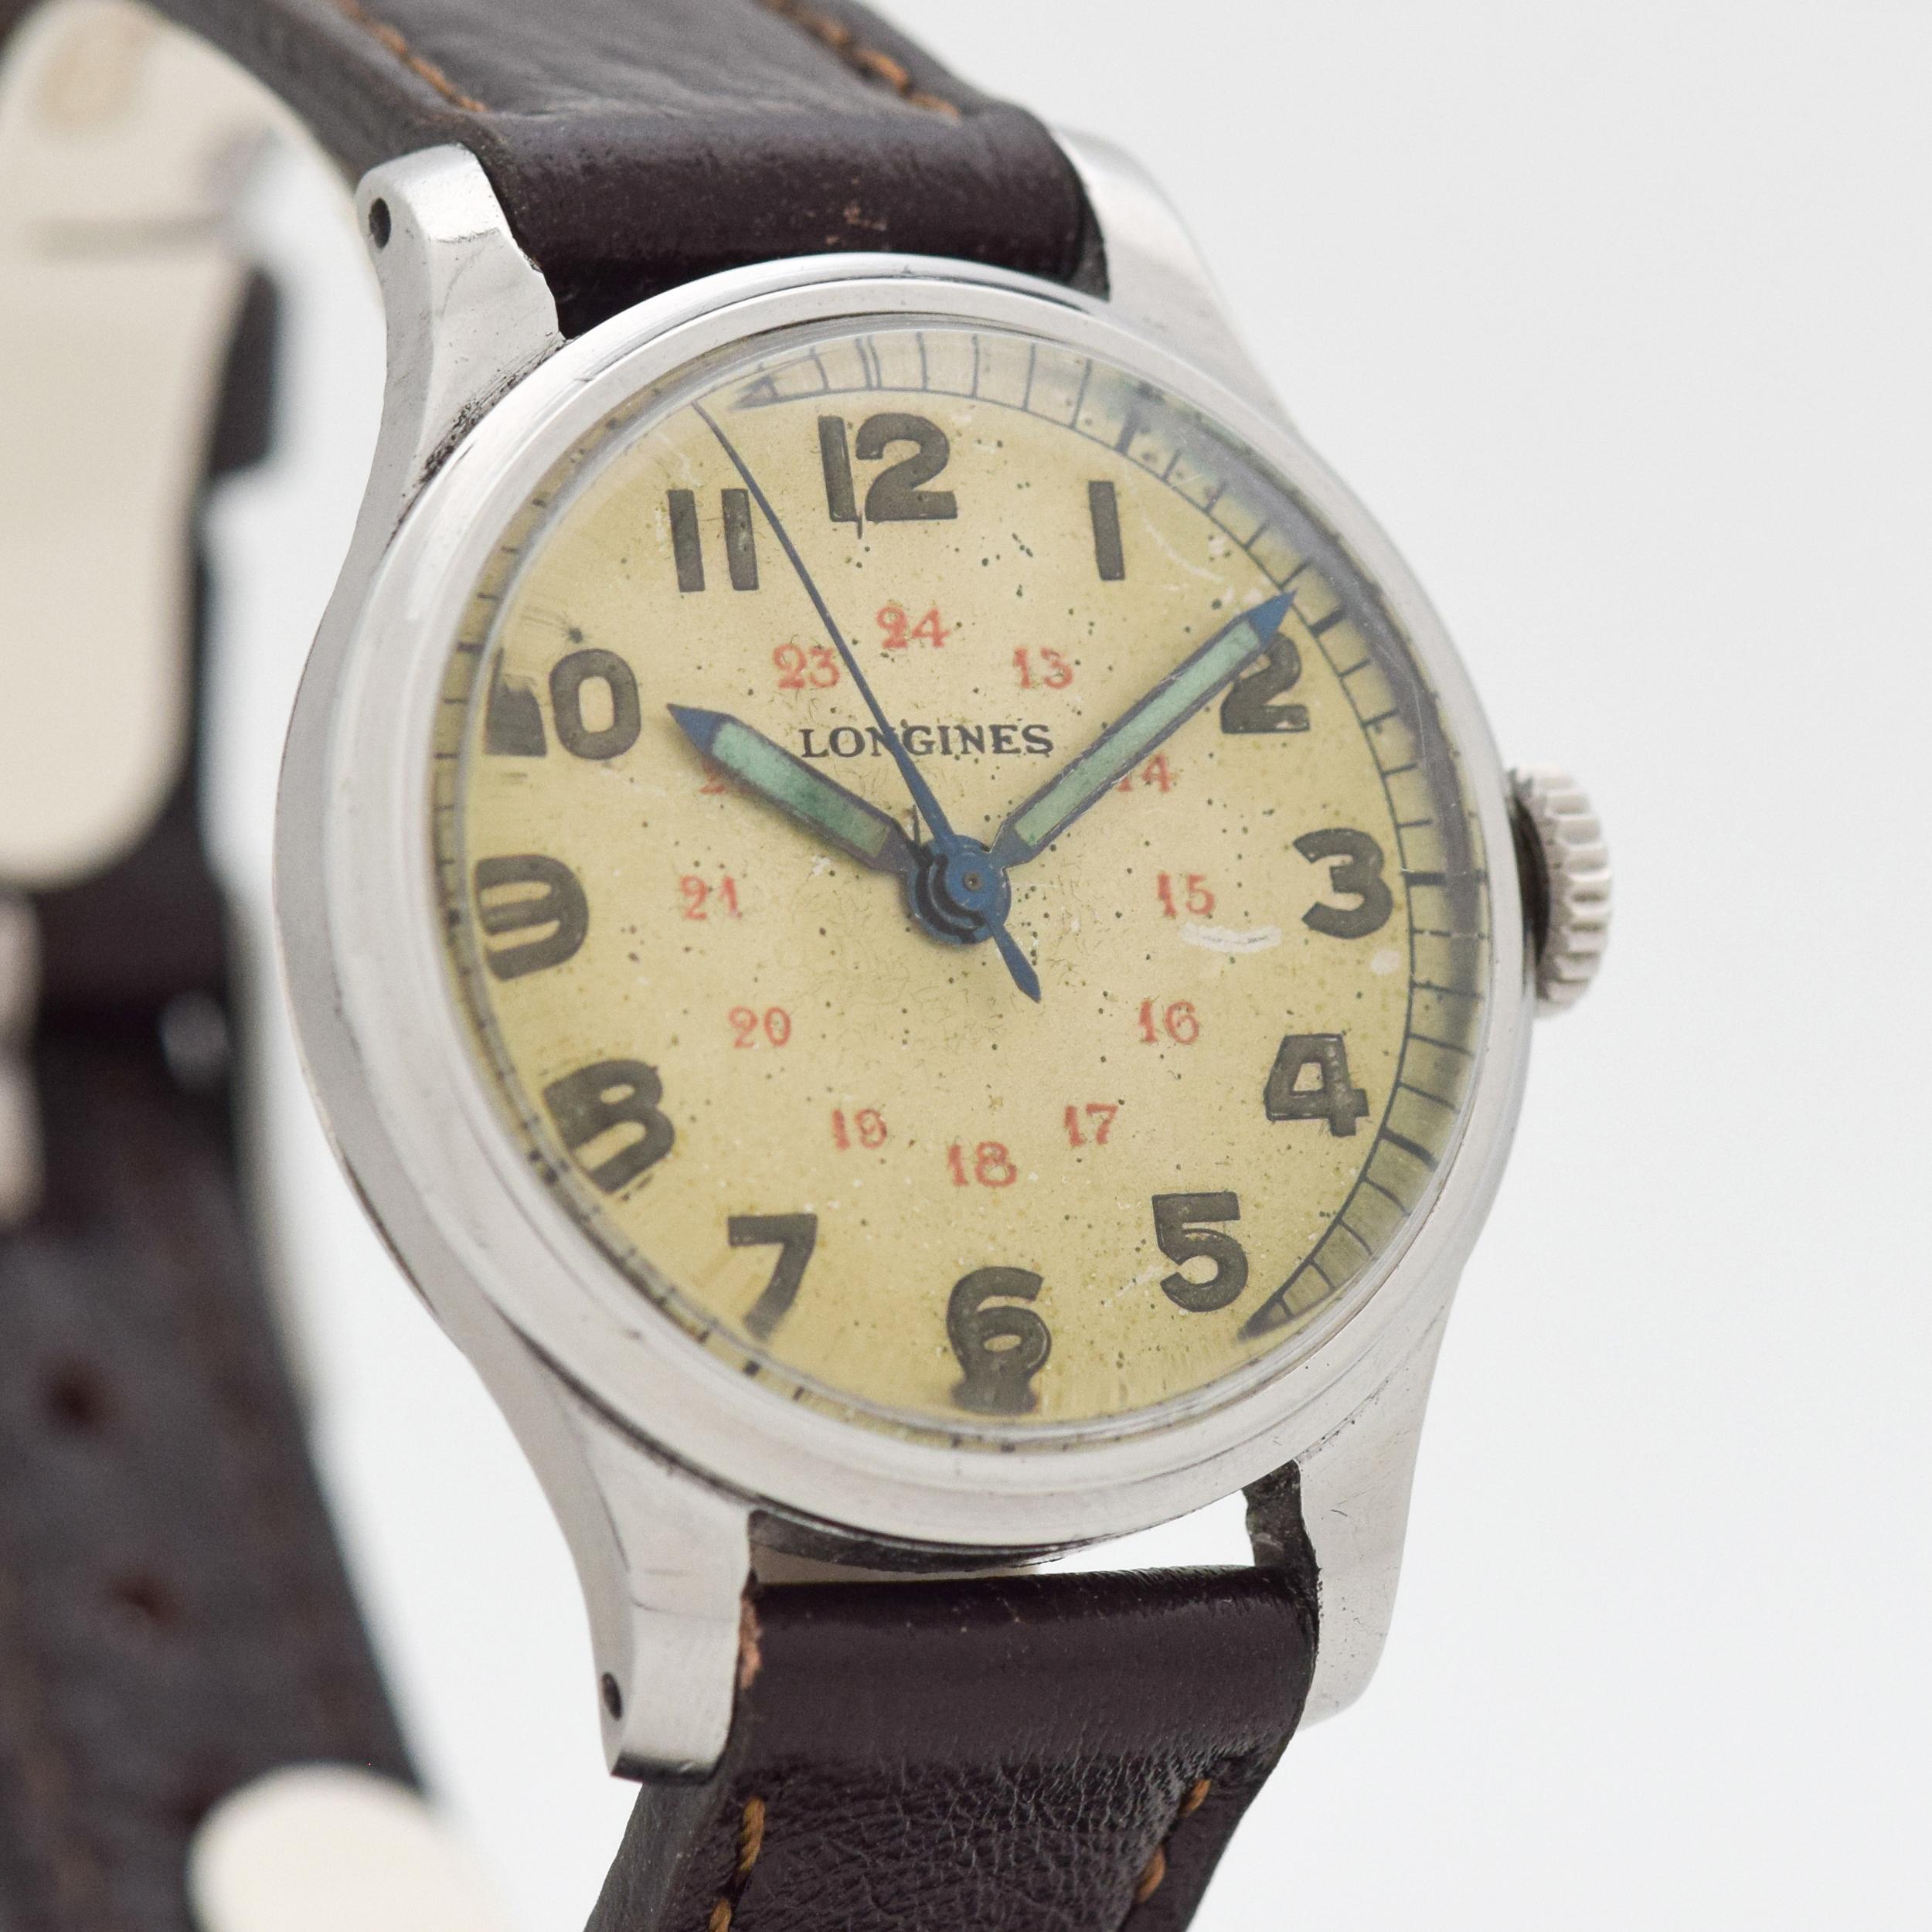 A 1944 Vintage Longines Military WWII-era wristwatch. Chrome & Stainless Steel example. 32mm wide. Original, patinated silver dial, aged with time. Powered by a 17-jewel, manual caliber movement. Equipped with a Genuine Leather Dark